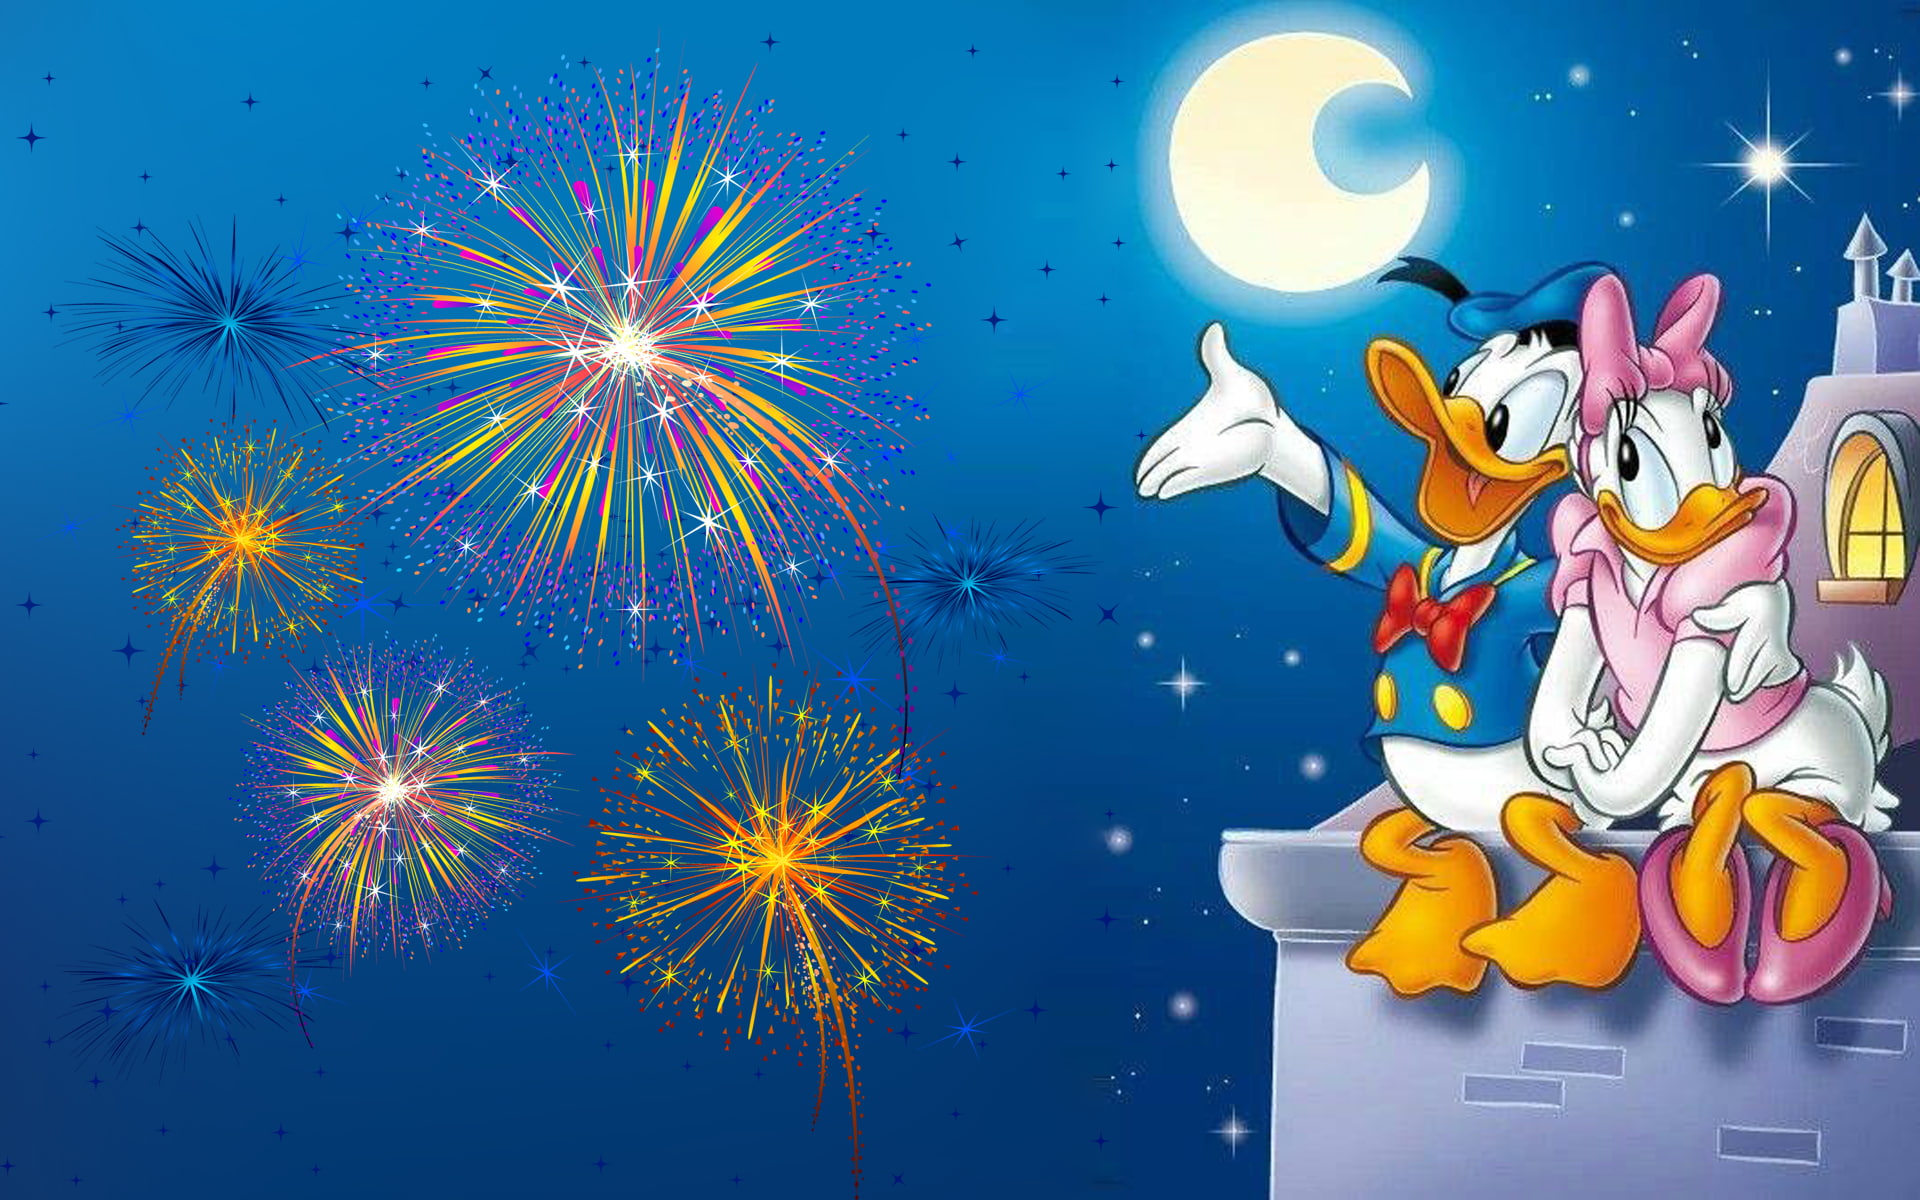 Donald Duck And Daisy Duck Romantic Evening Watching The Full Moon Fireworks Hd Wallpapers For Mobile Phones Tablet And Laptop 1920×1200